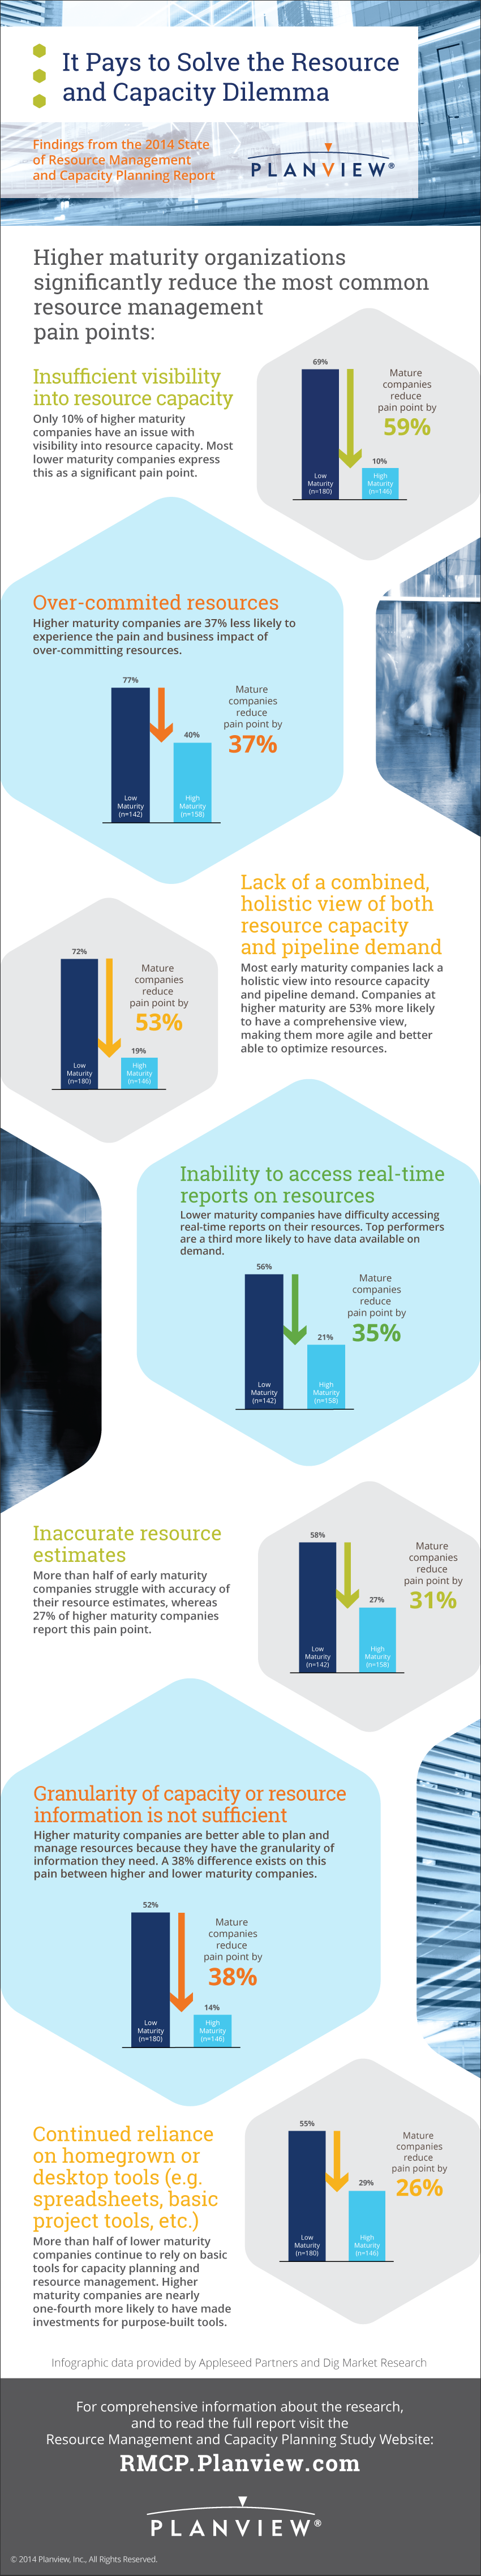 Planview Resource Management Capacity Planning 2014 Infographic